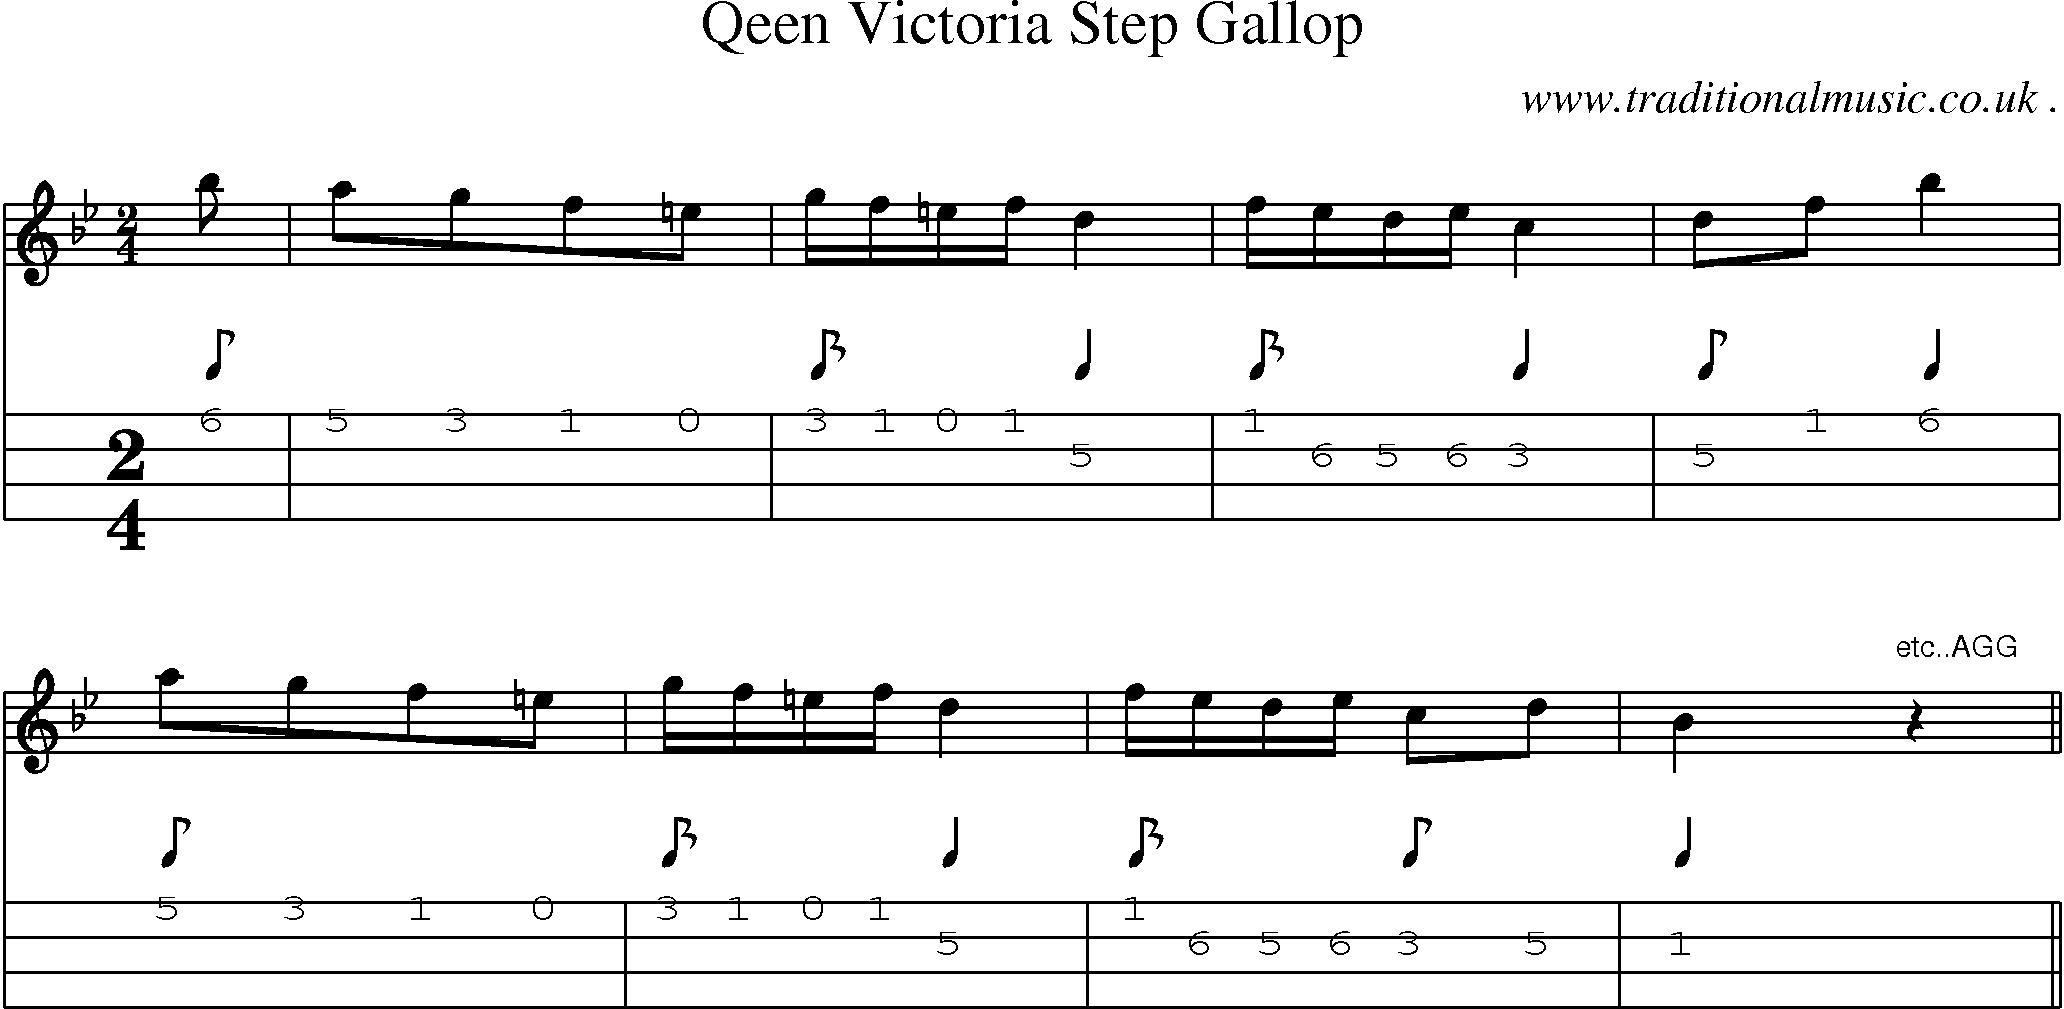 Sheet-Music and Mandolin Tabs for Qeen Victoria Step Gallop